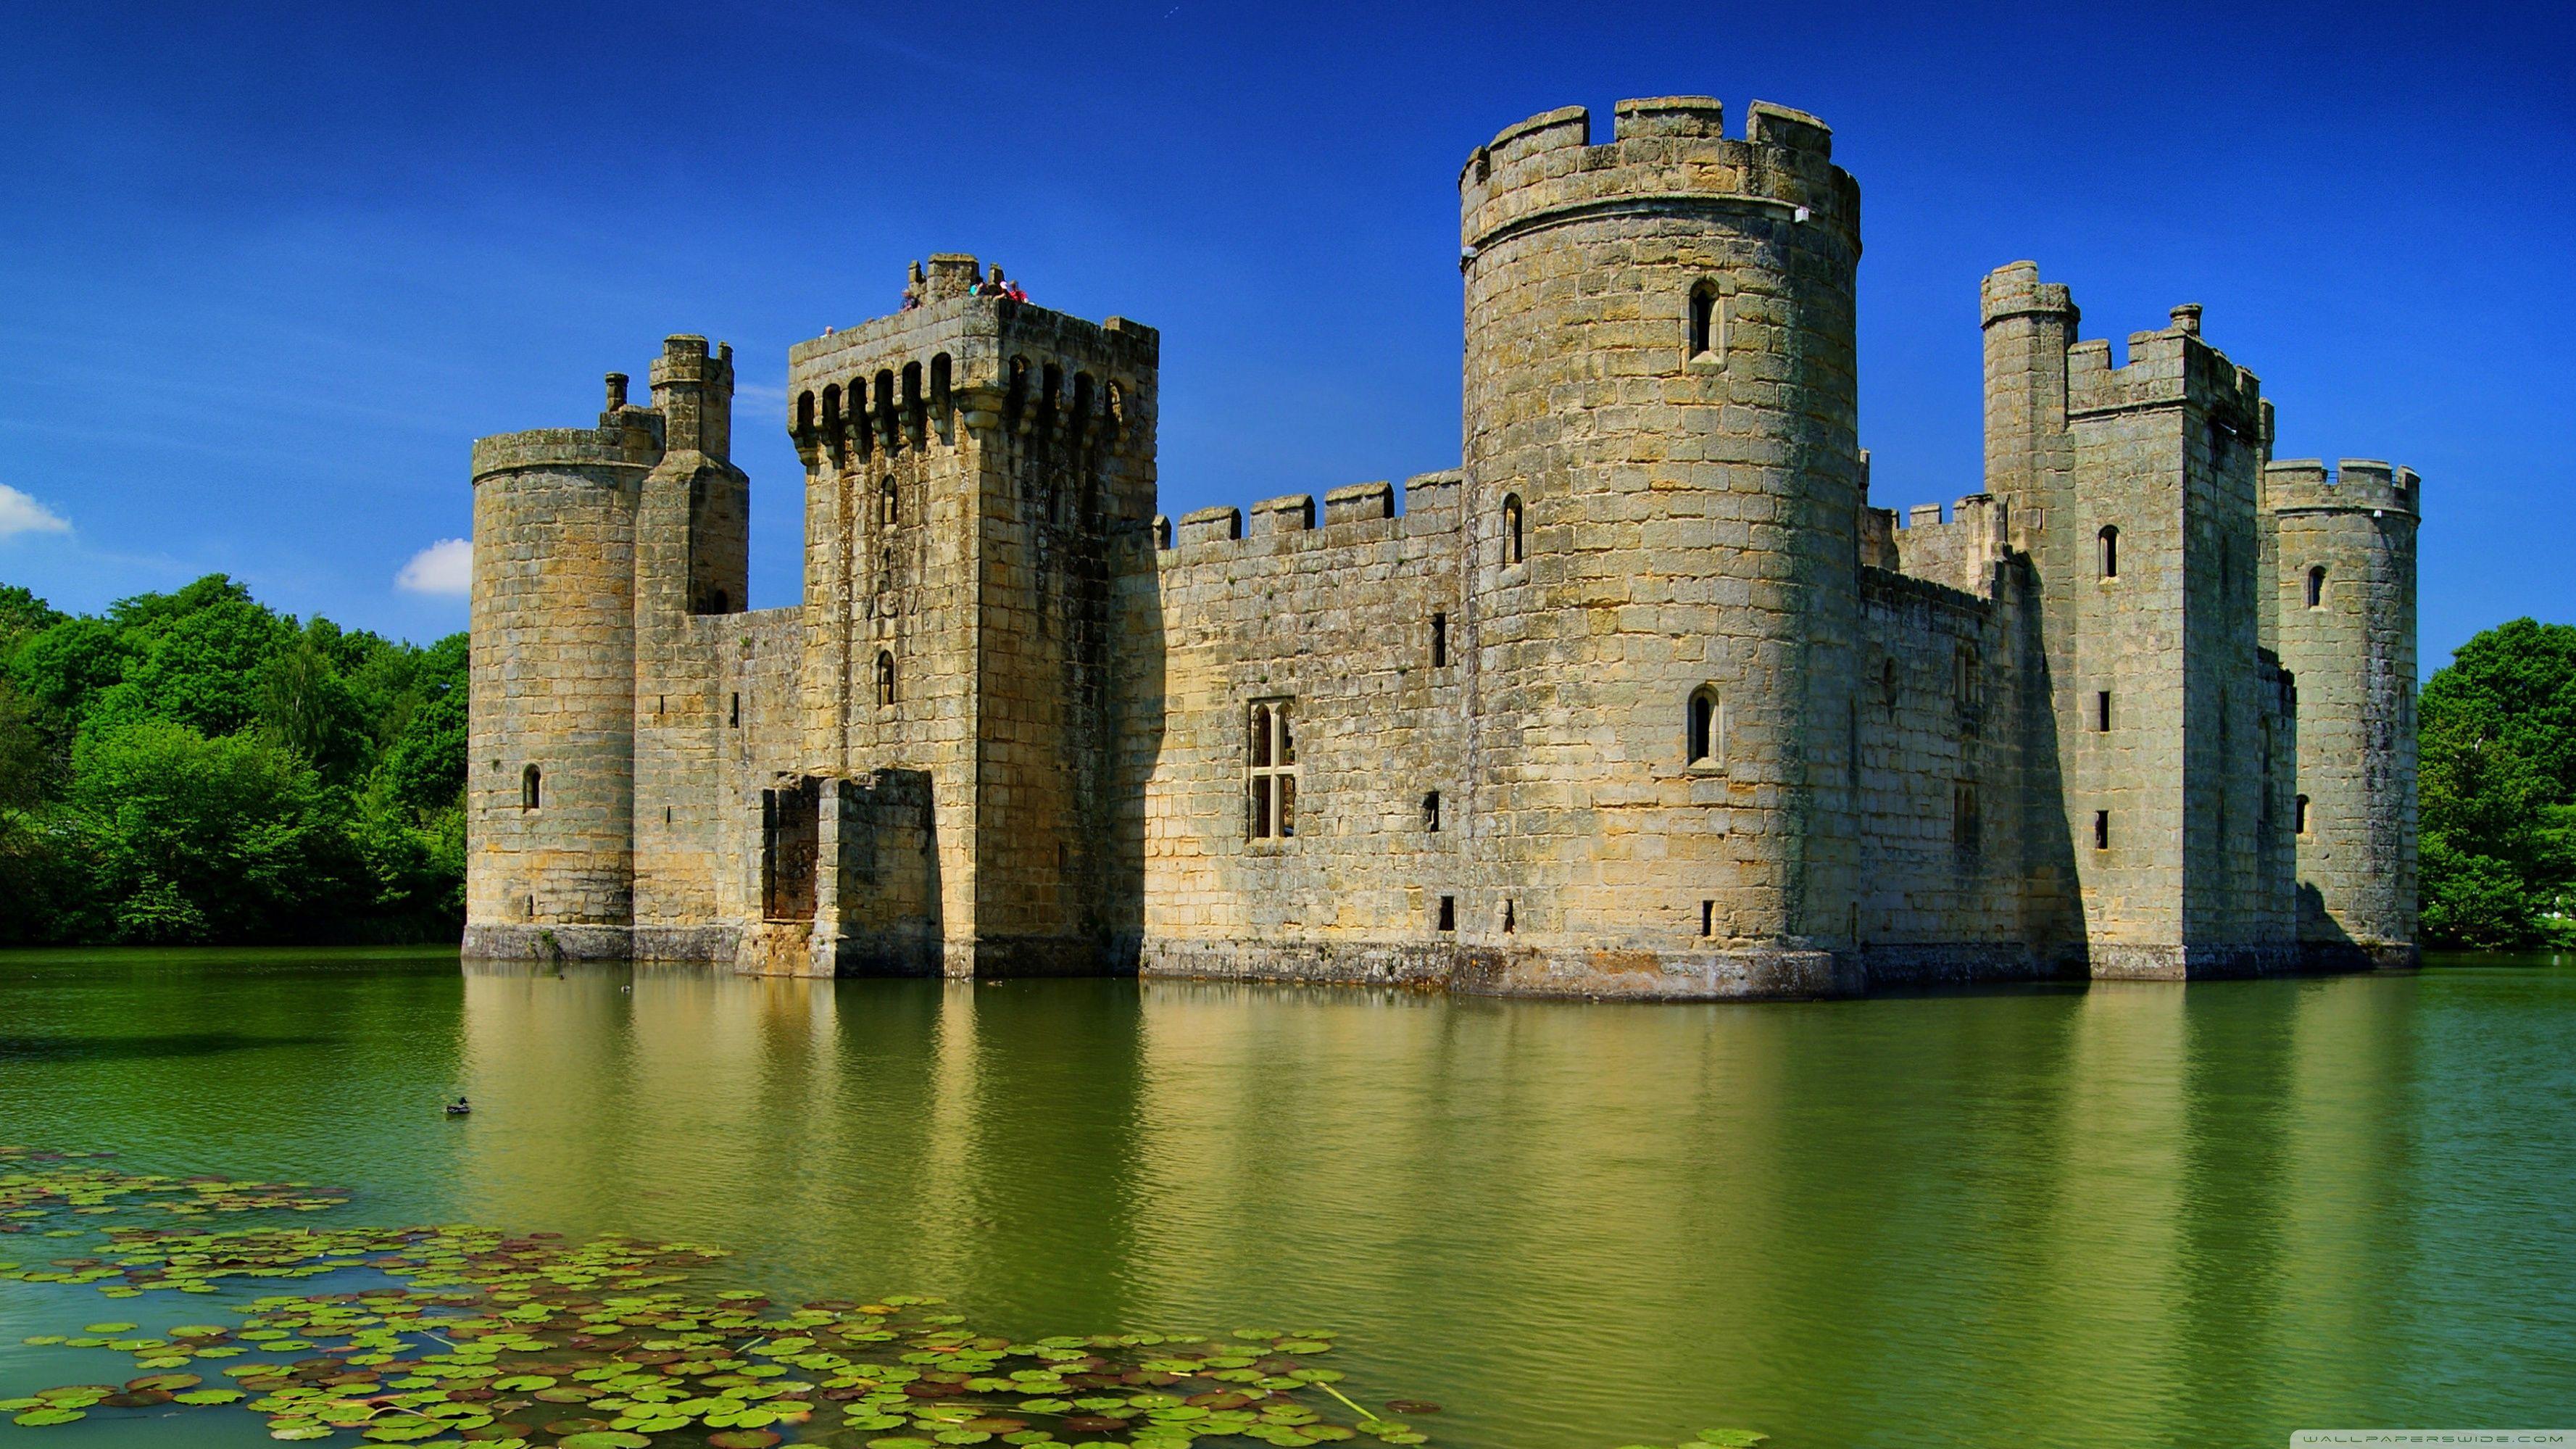 Castles of Europe Wallpapers - Top Free Castles of Europe Backgrounds